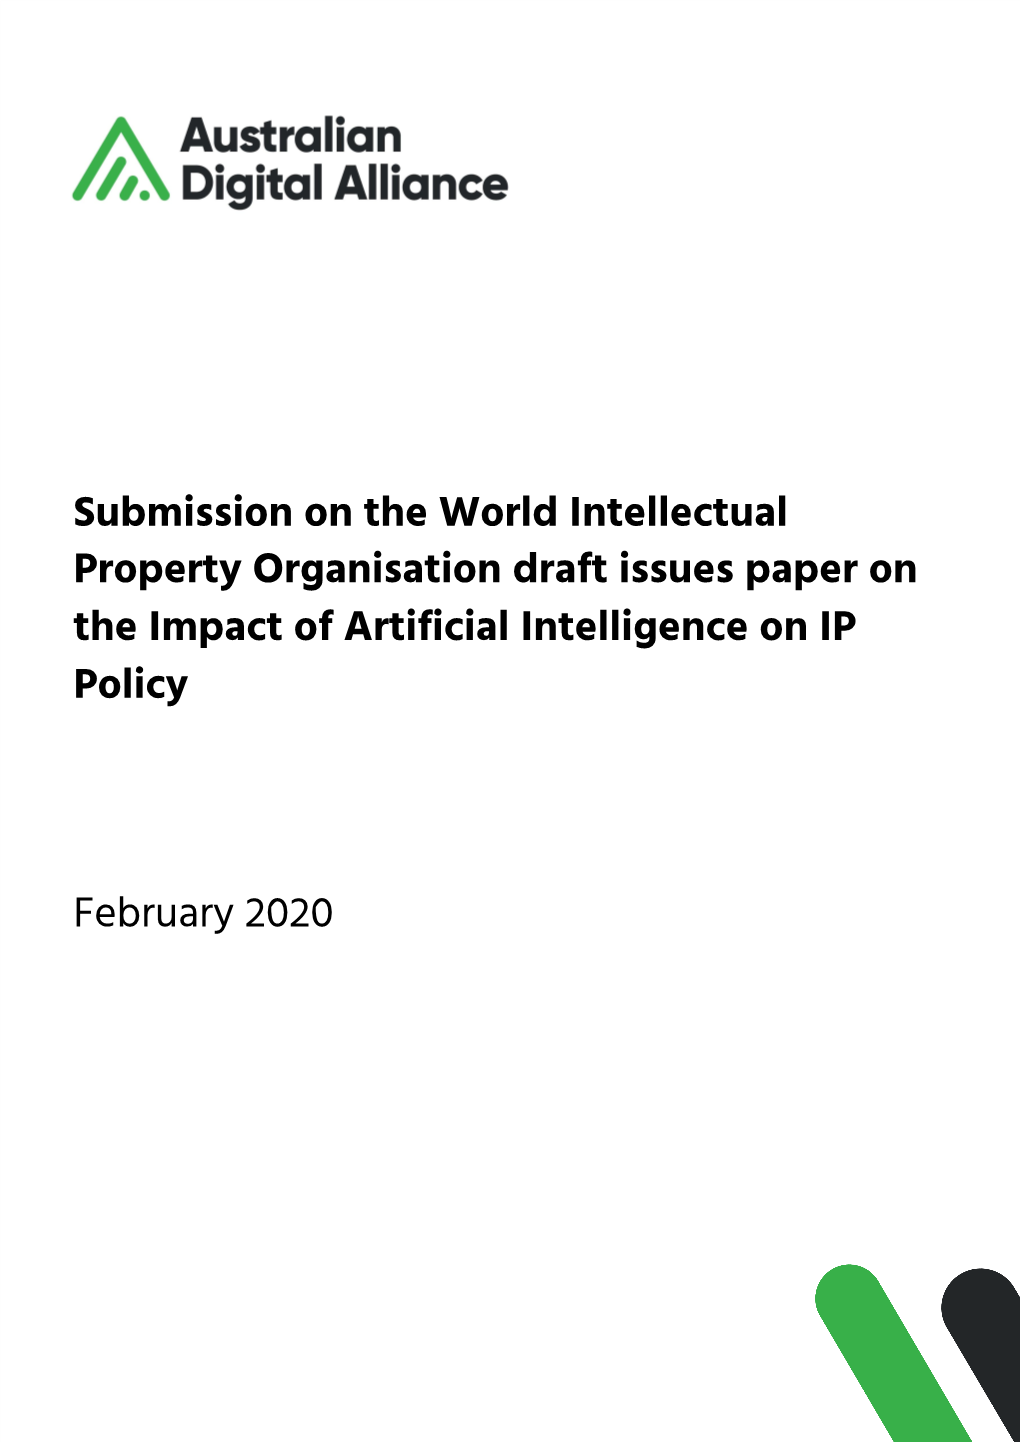 Submission on the World Intellectual Property Organisation Draft Issues Paper on the Impact of Artificial Intelligence on IP Policy